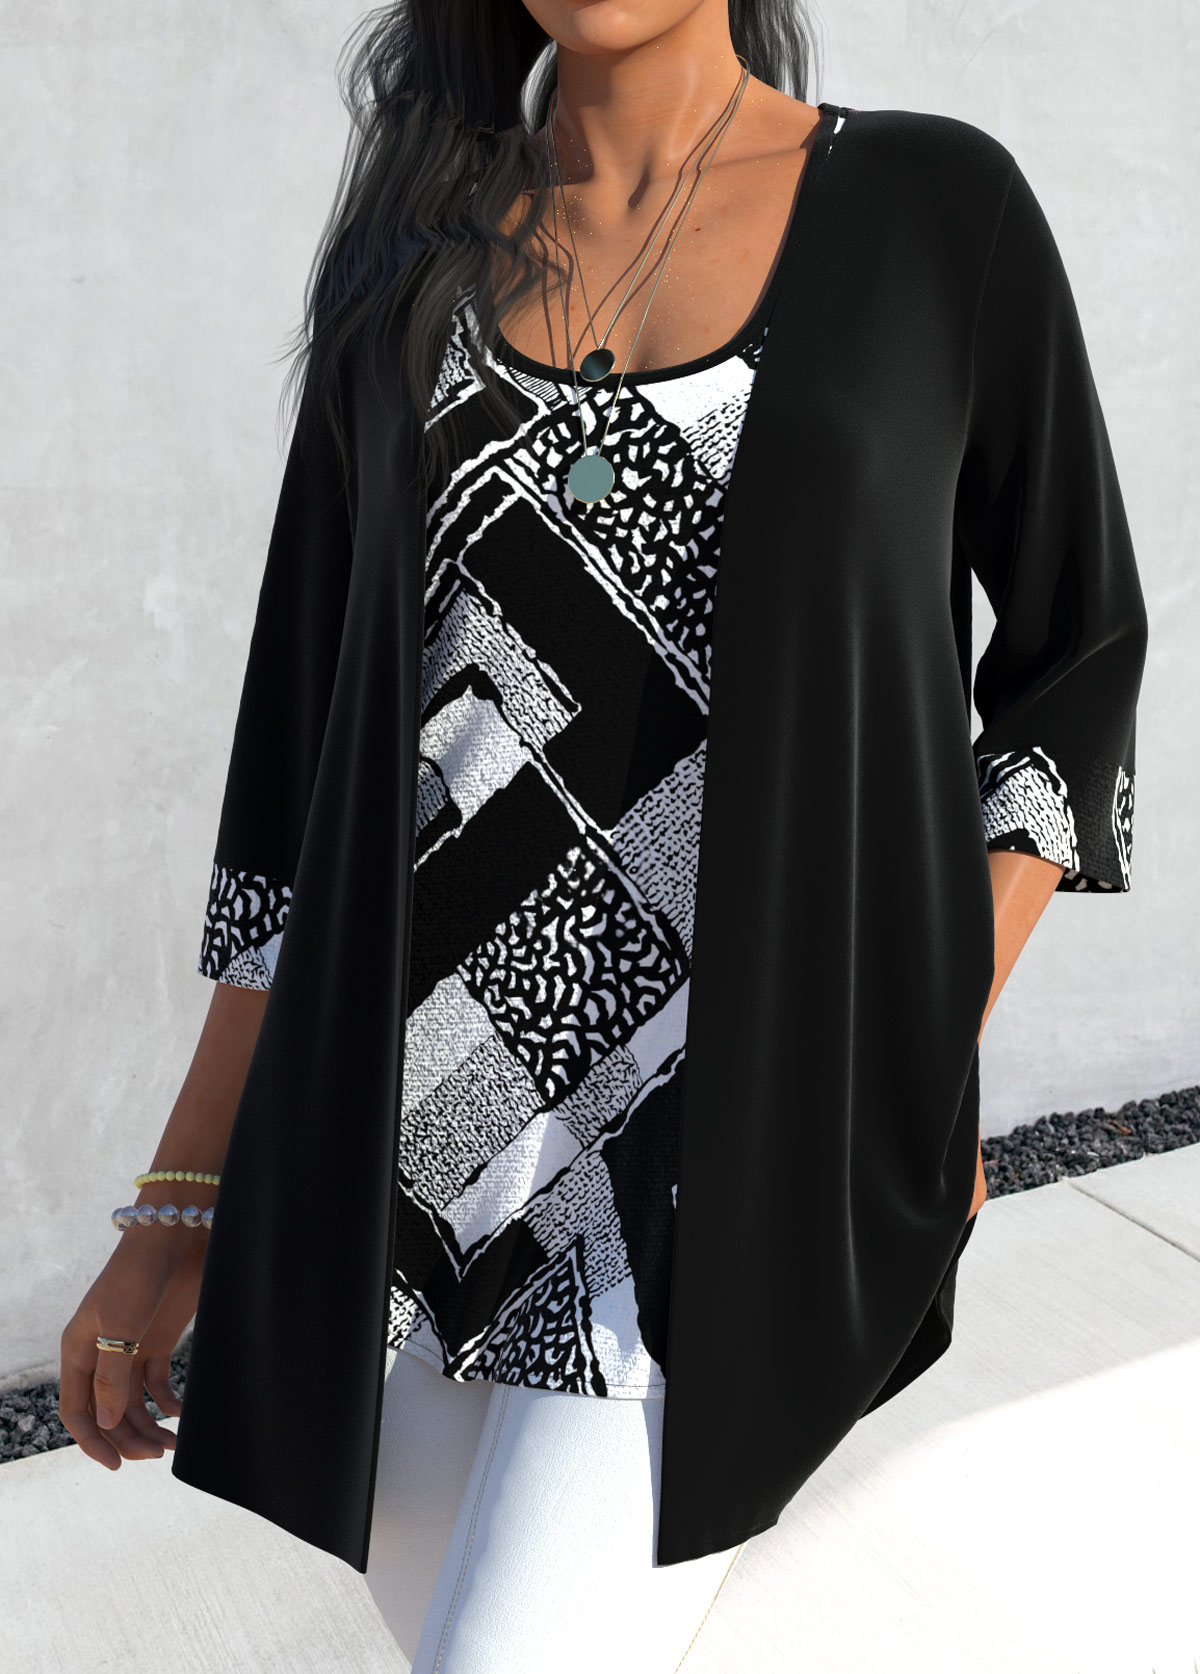 Plus Size Two Piece Black Tank Top and Cardigan